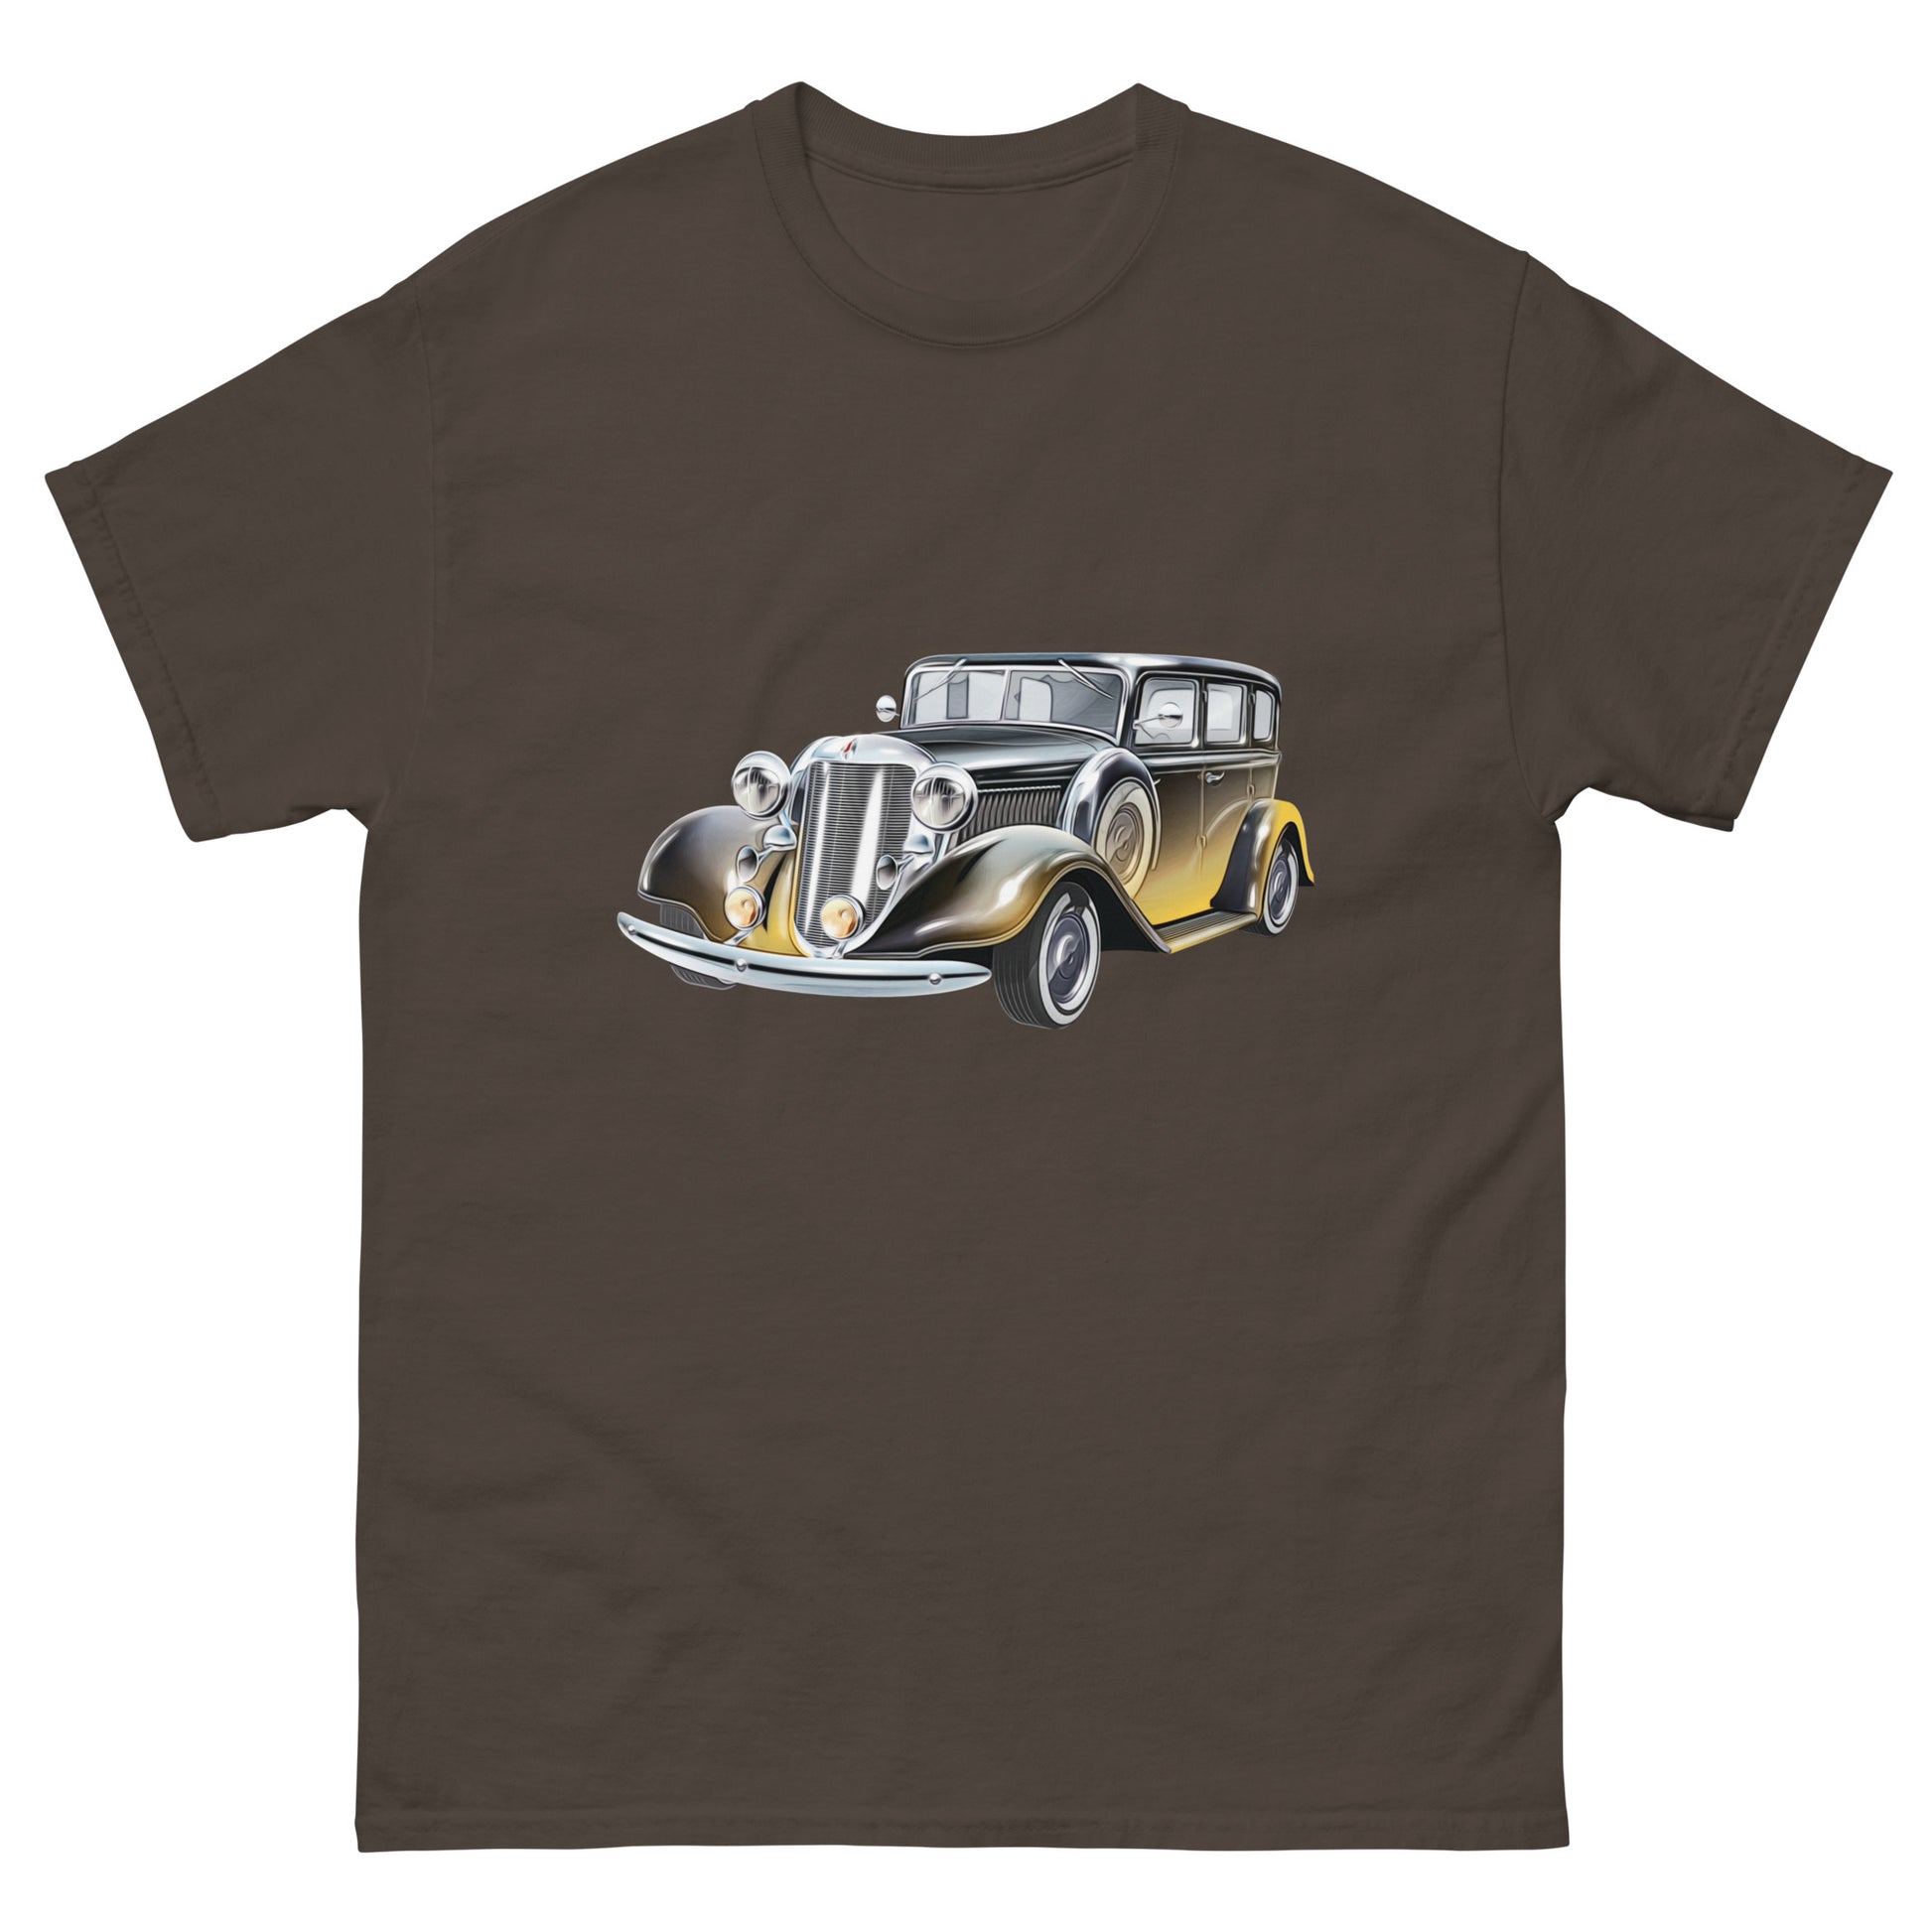 brown t-shirt with picture of vintage car